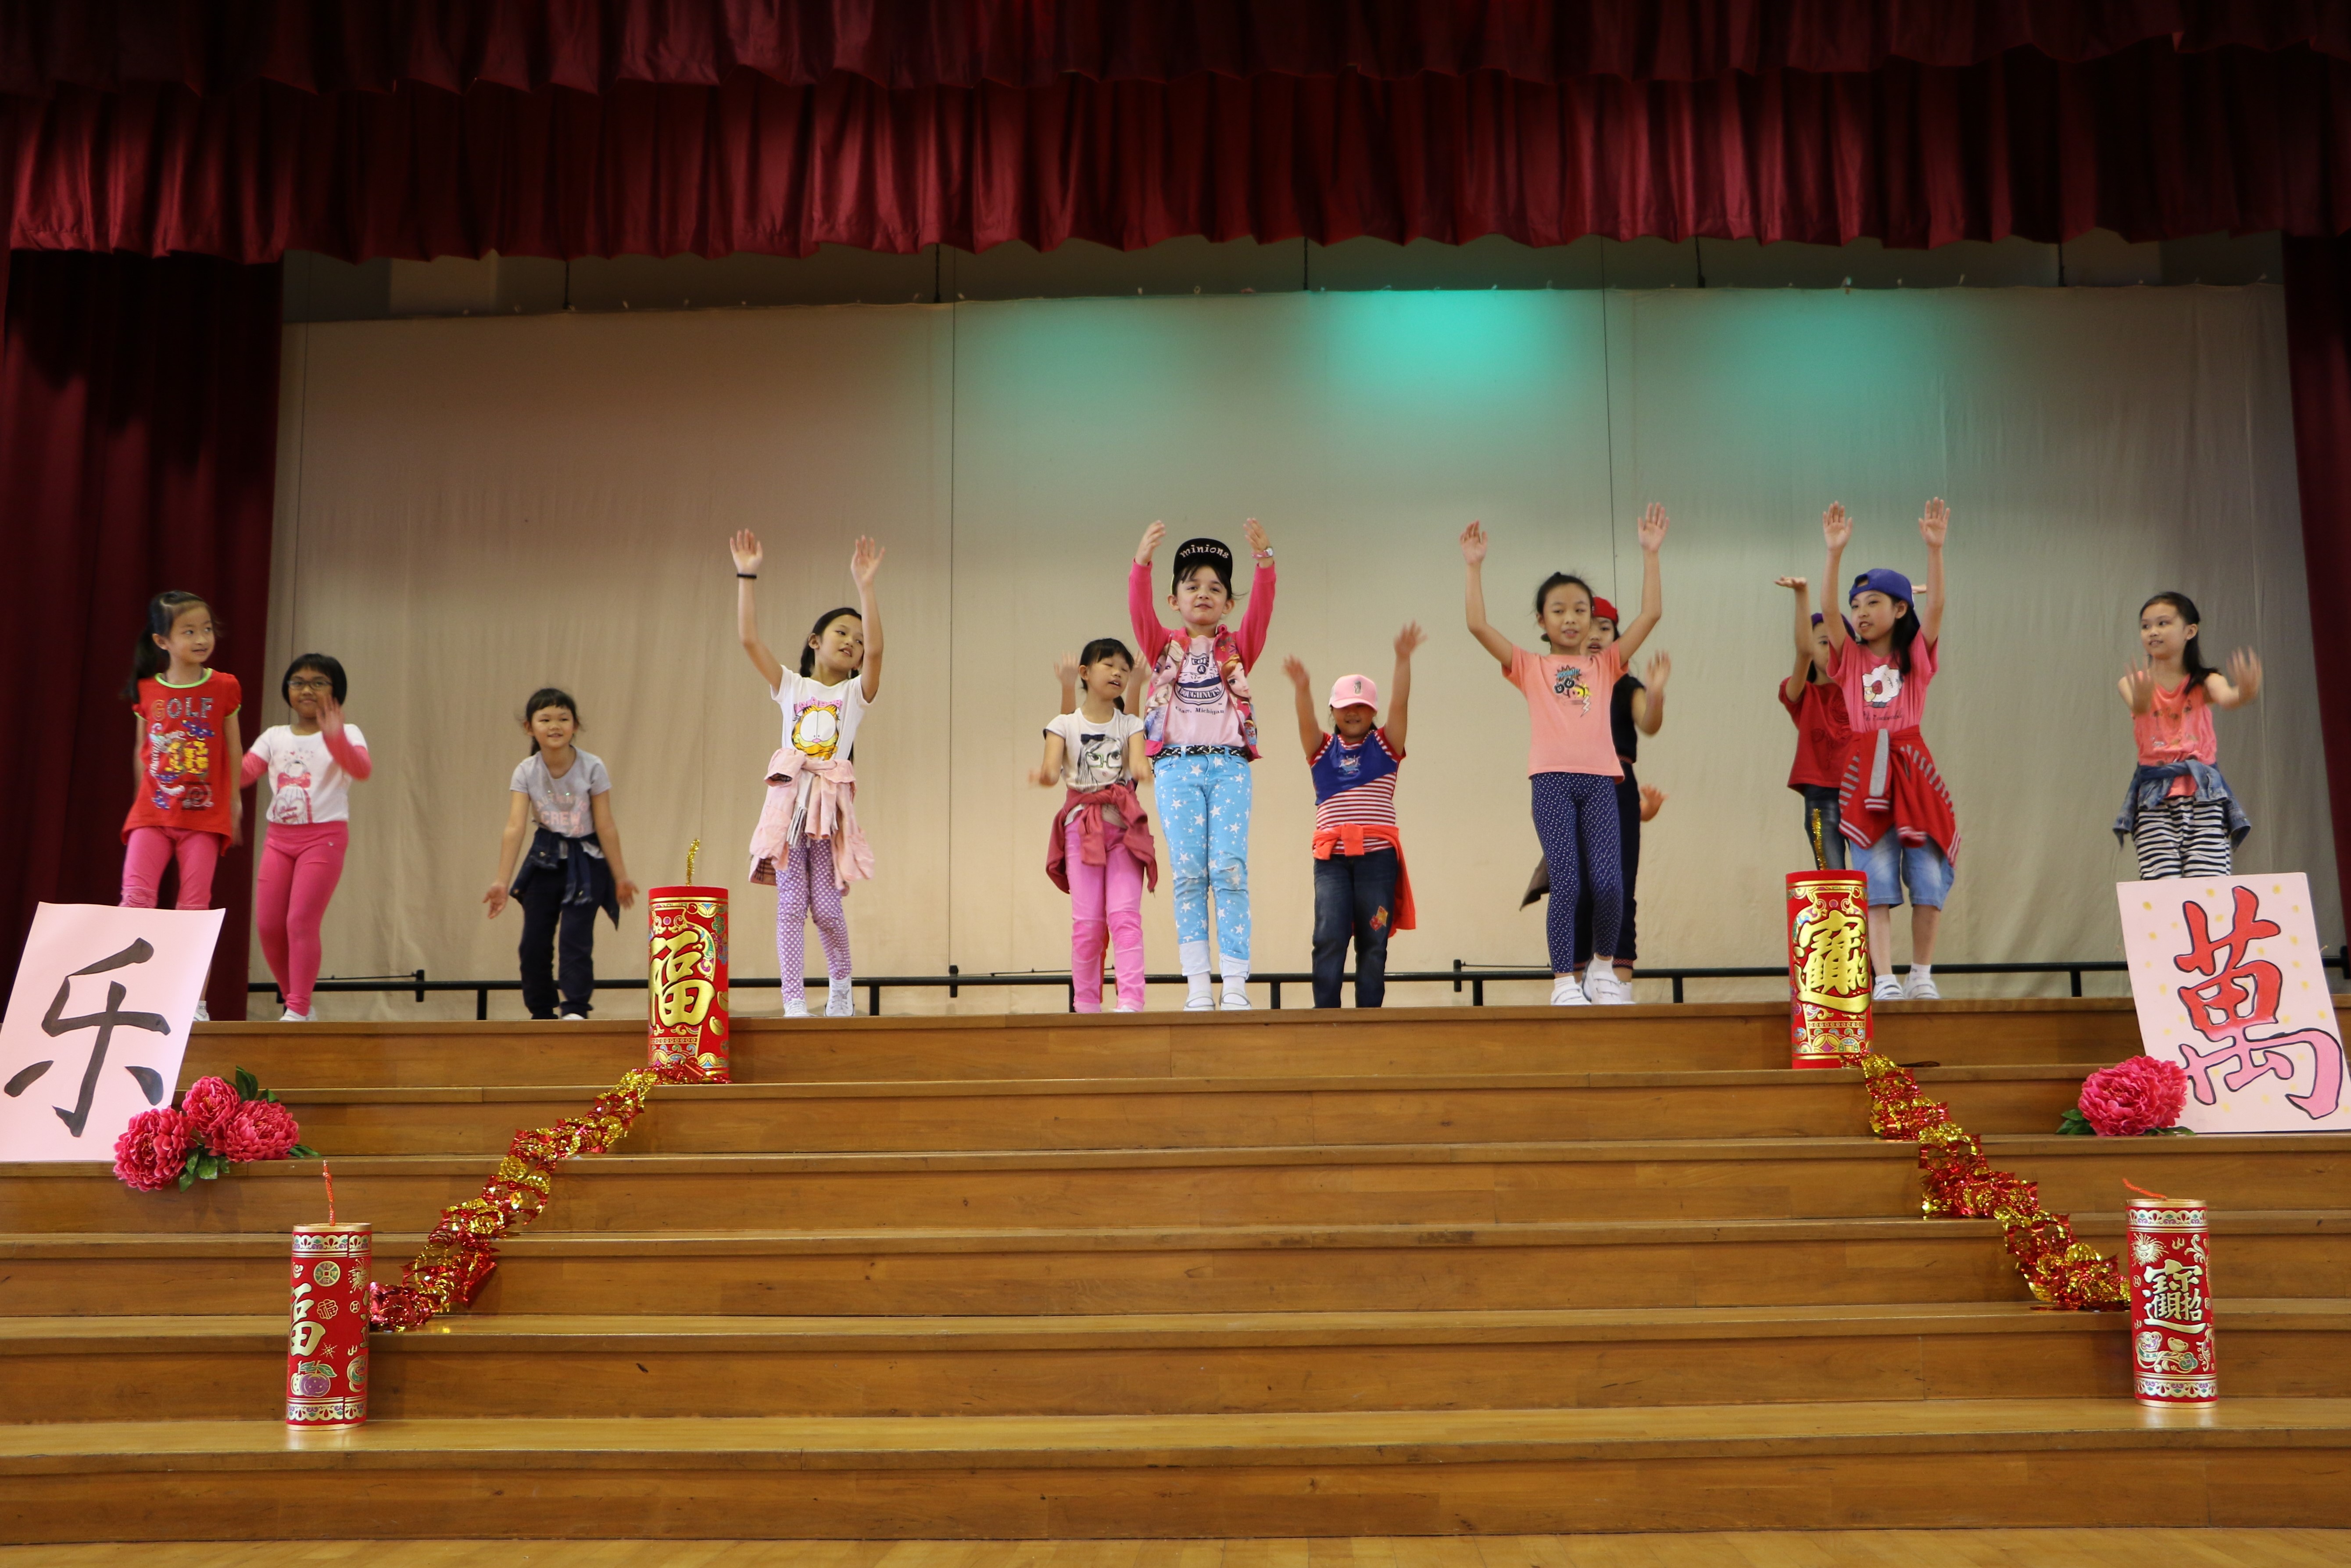 Primary 3 Students singing and dancing to an upbeat Chinese New Year song~